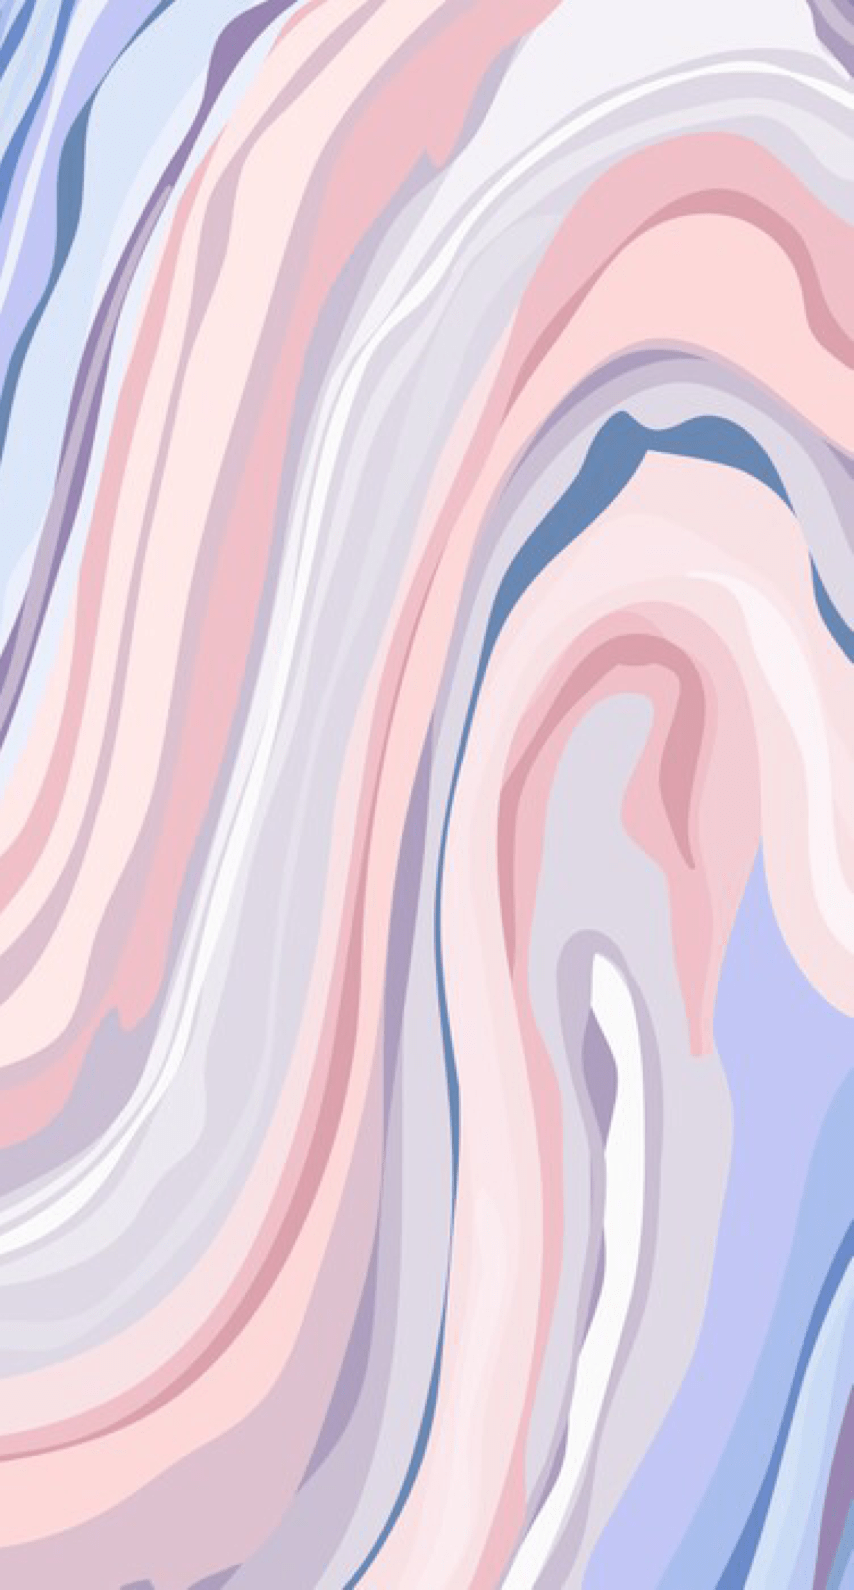 A pink and blue marble pattern - VSCO